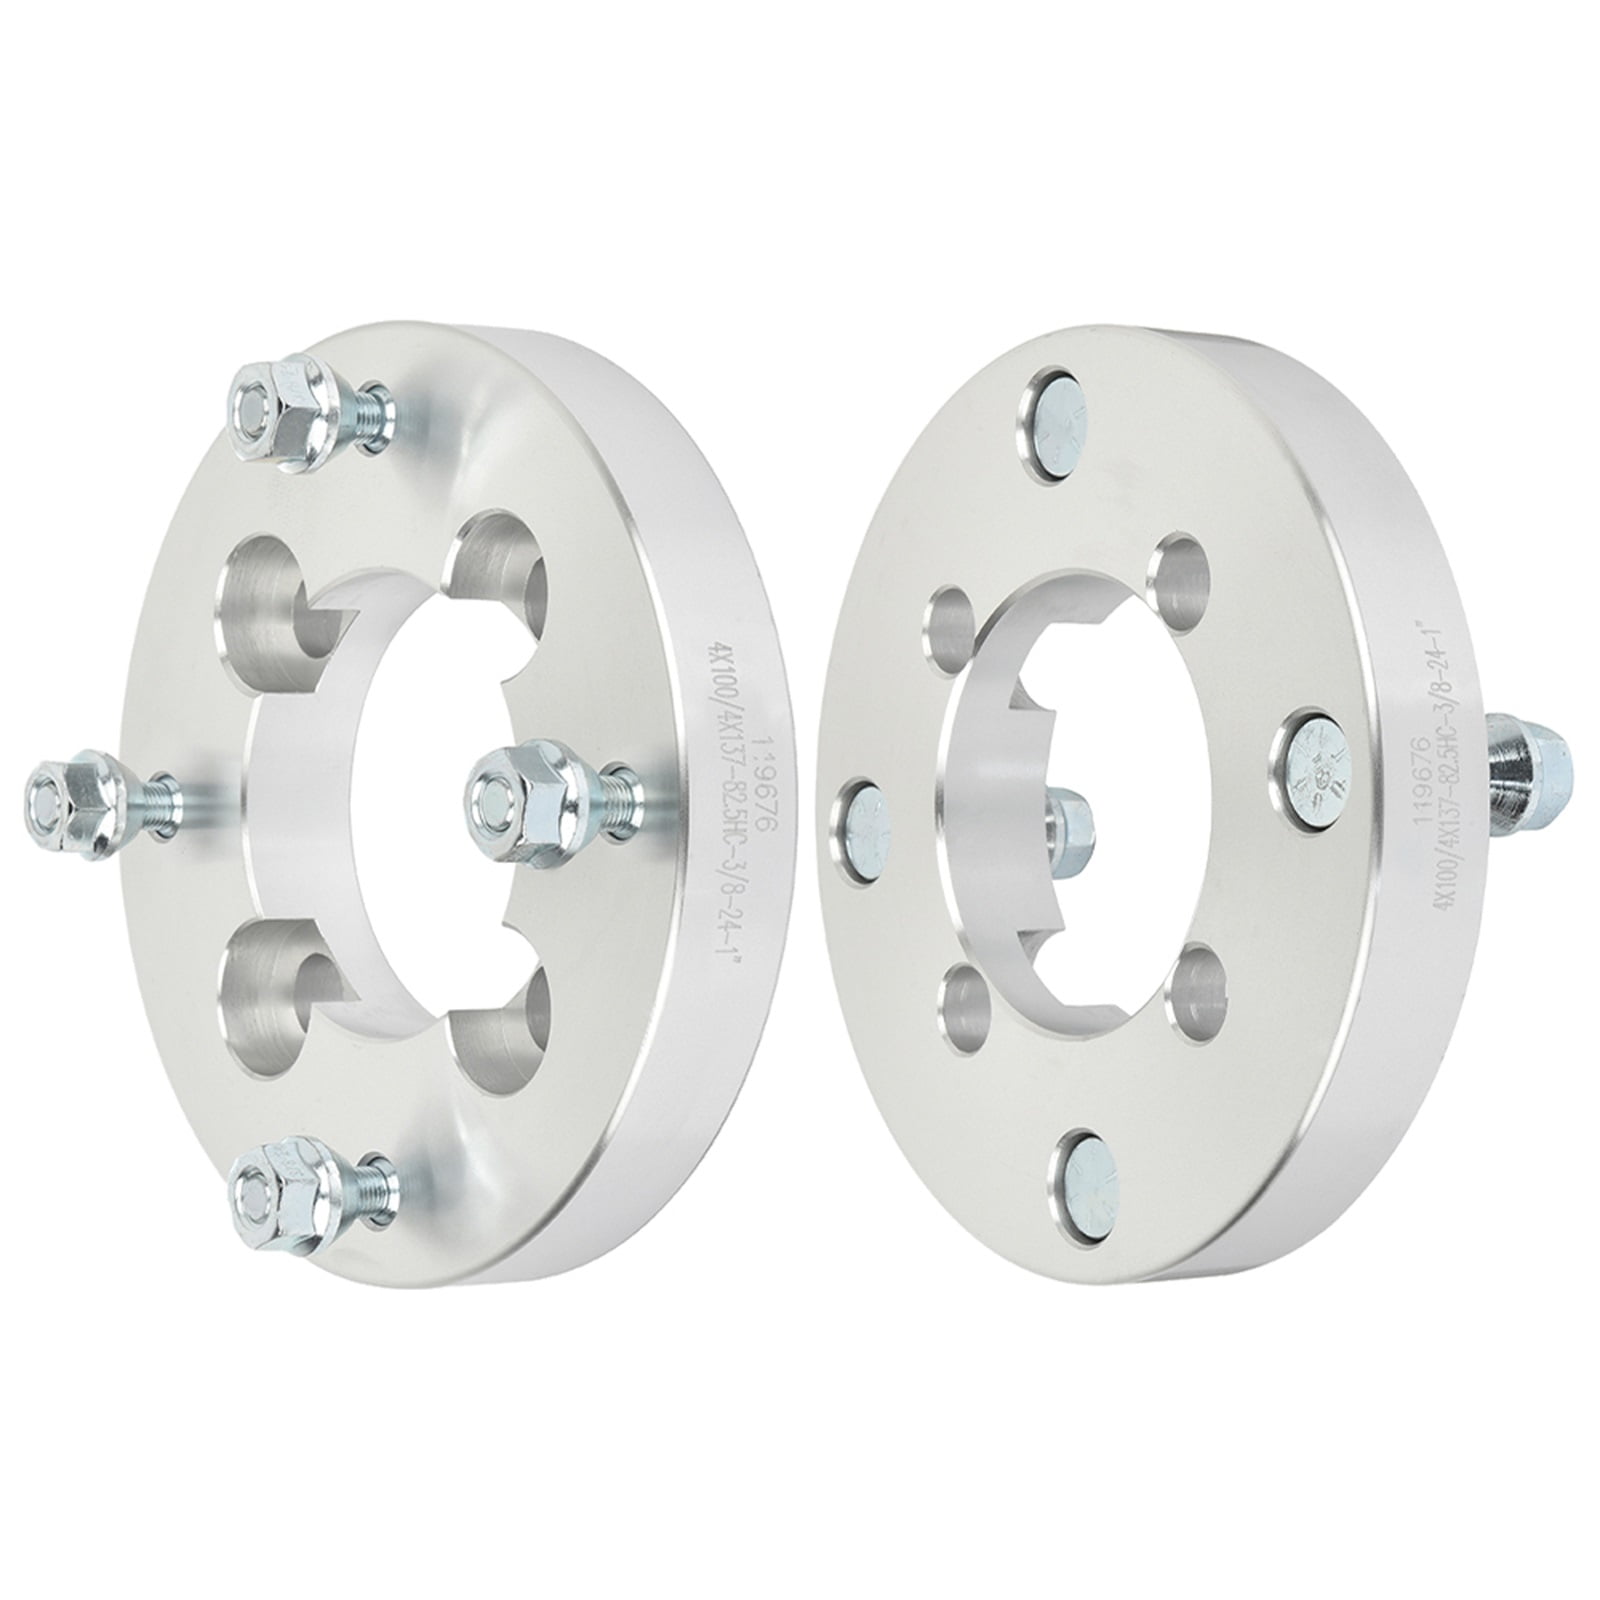 SCITOO 2x 4 lug Wheel Spacers Adapters 4x100 to 4x137 3/8 74 1 compatible with 2008-2015 Can-Am DS450 1981-1986 Honda ATC250R 1997-2004 Honda Foreman 400 